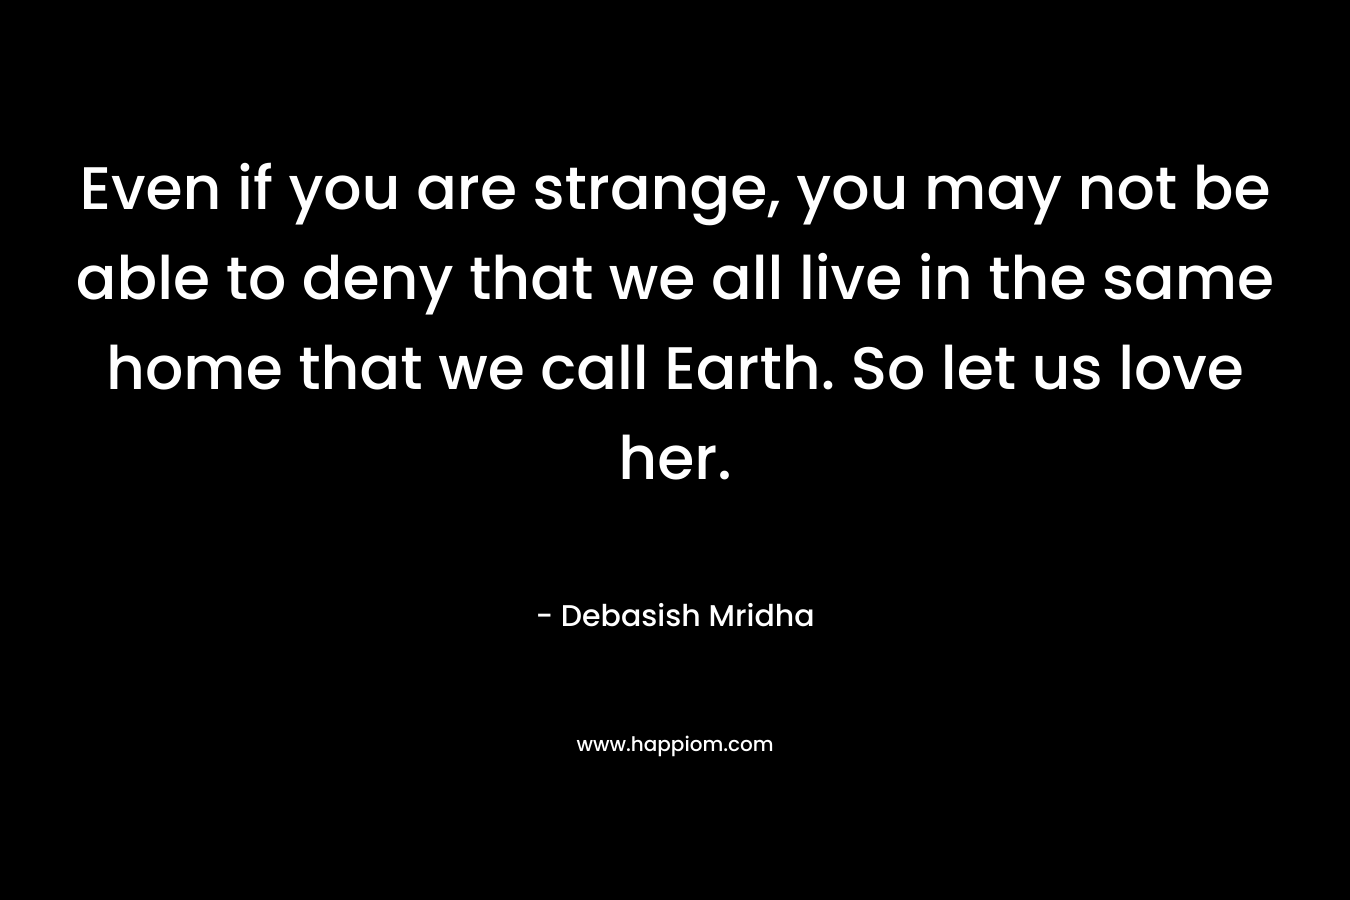 Even if you are strange, you may not be able to deny that we all live in the same home that we call Earth. So let us love her.